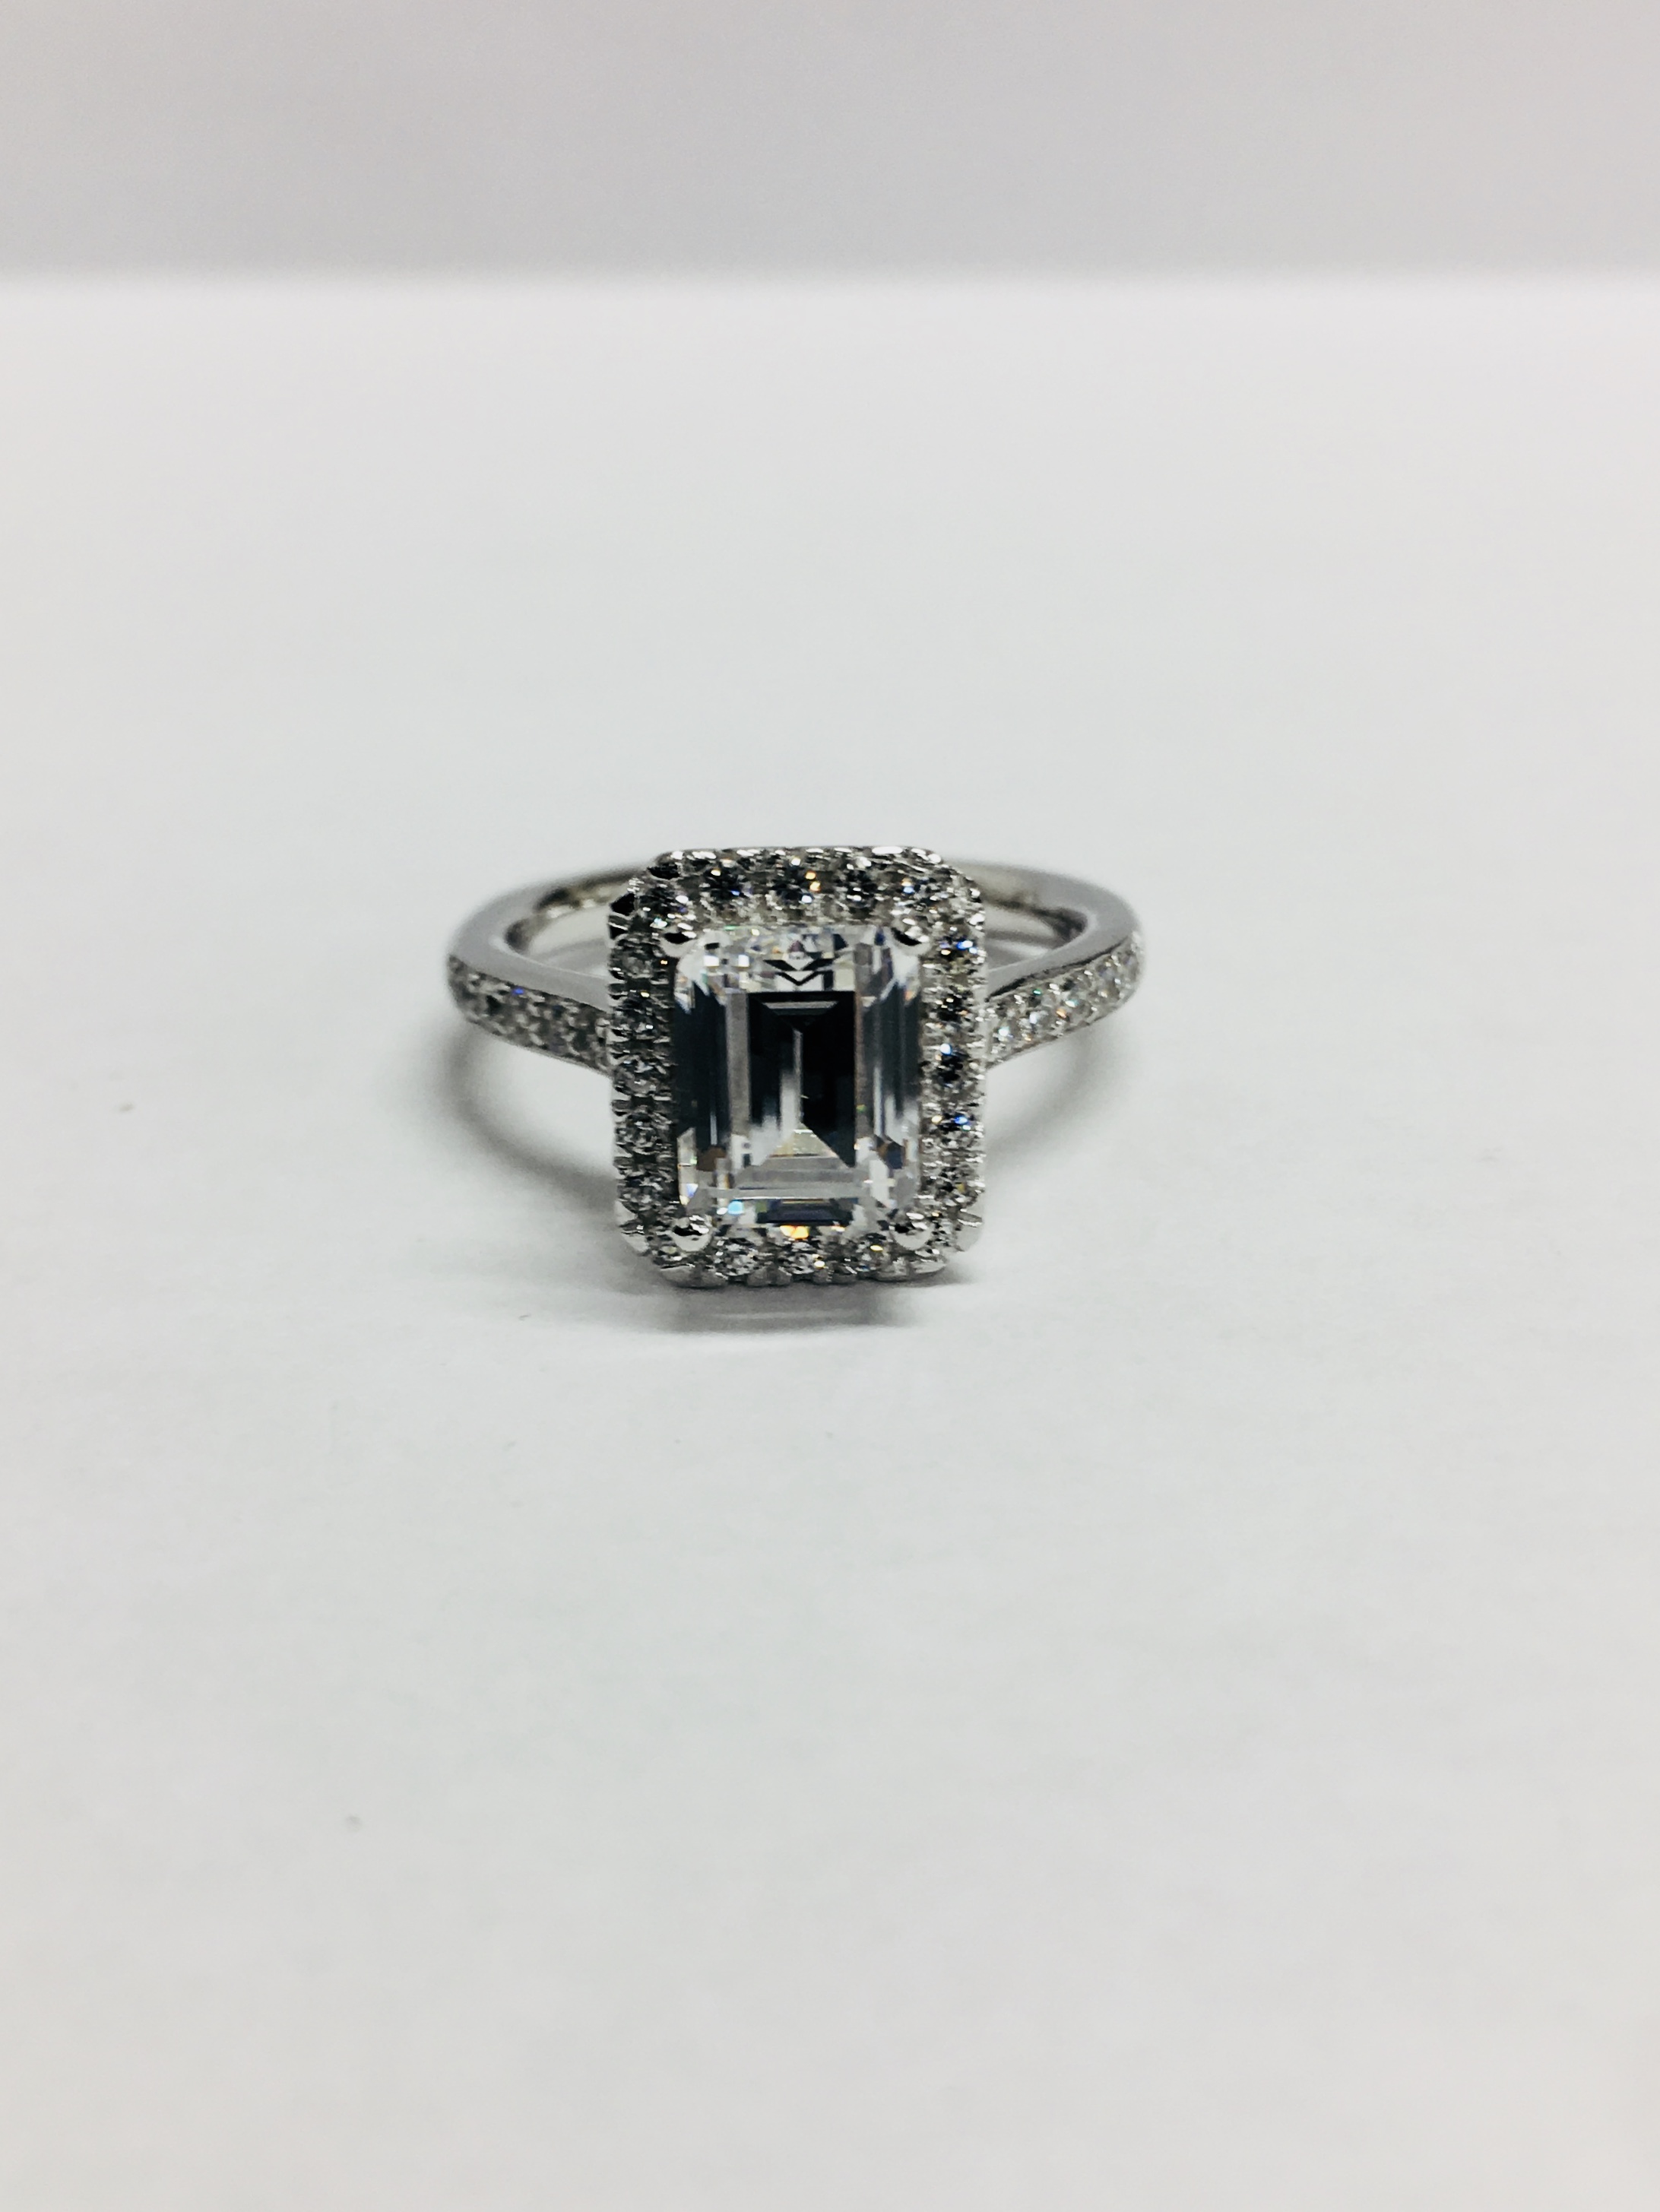 1.2ct diamond solitaire ring set with an emerald cut diamond - Image 2 of 8